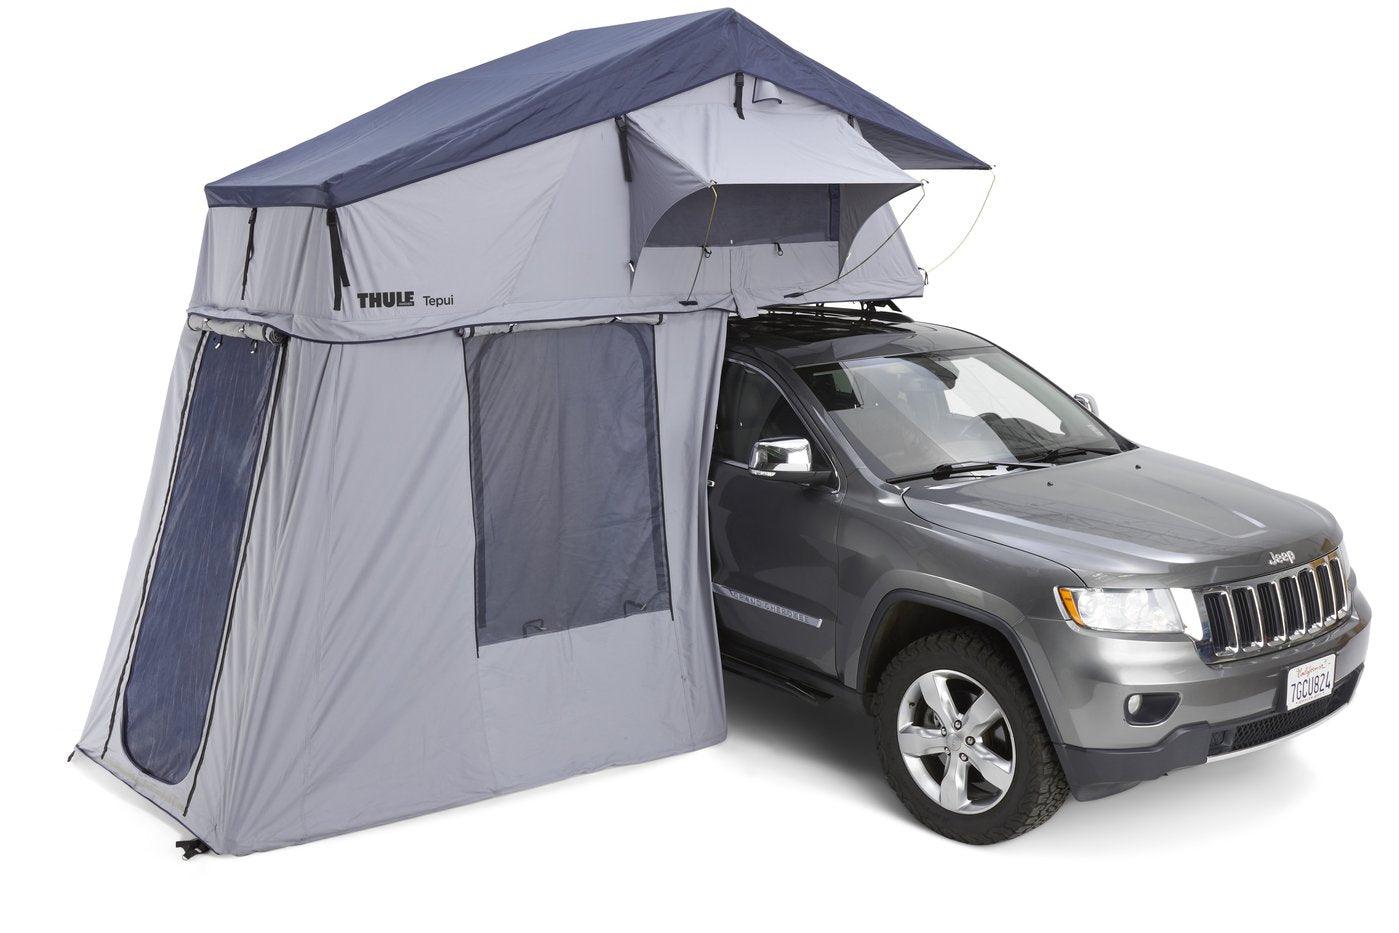 Thule Tepui Autana Explorer Series - 4 Person Roof Top Tent - Annex Included